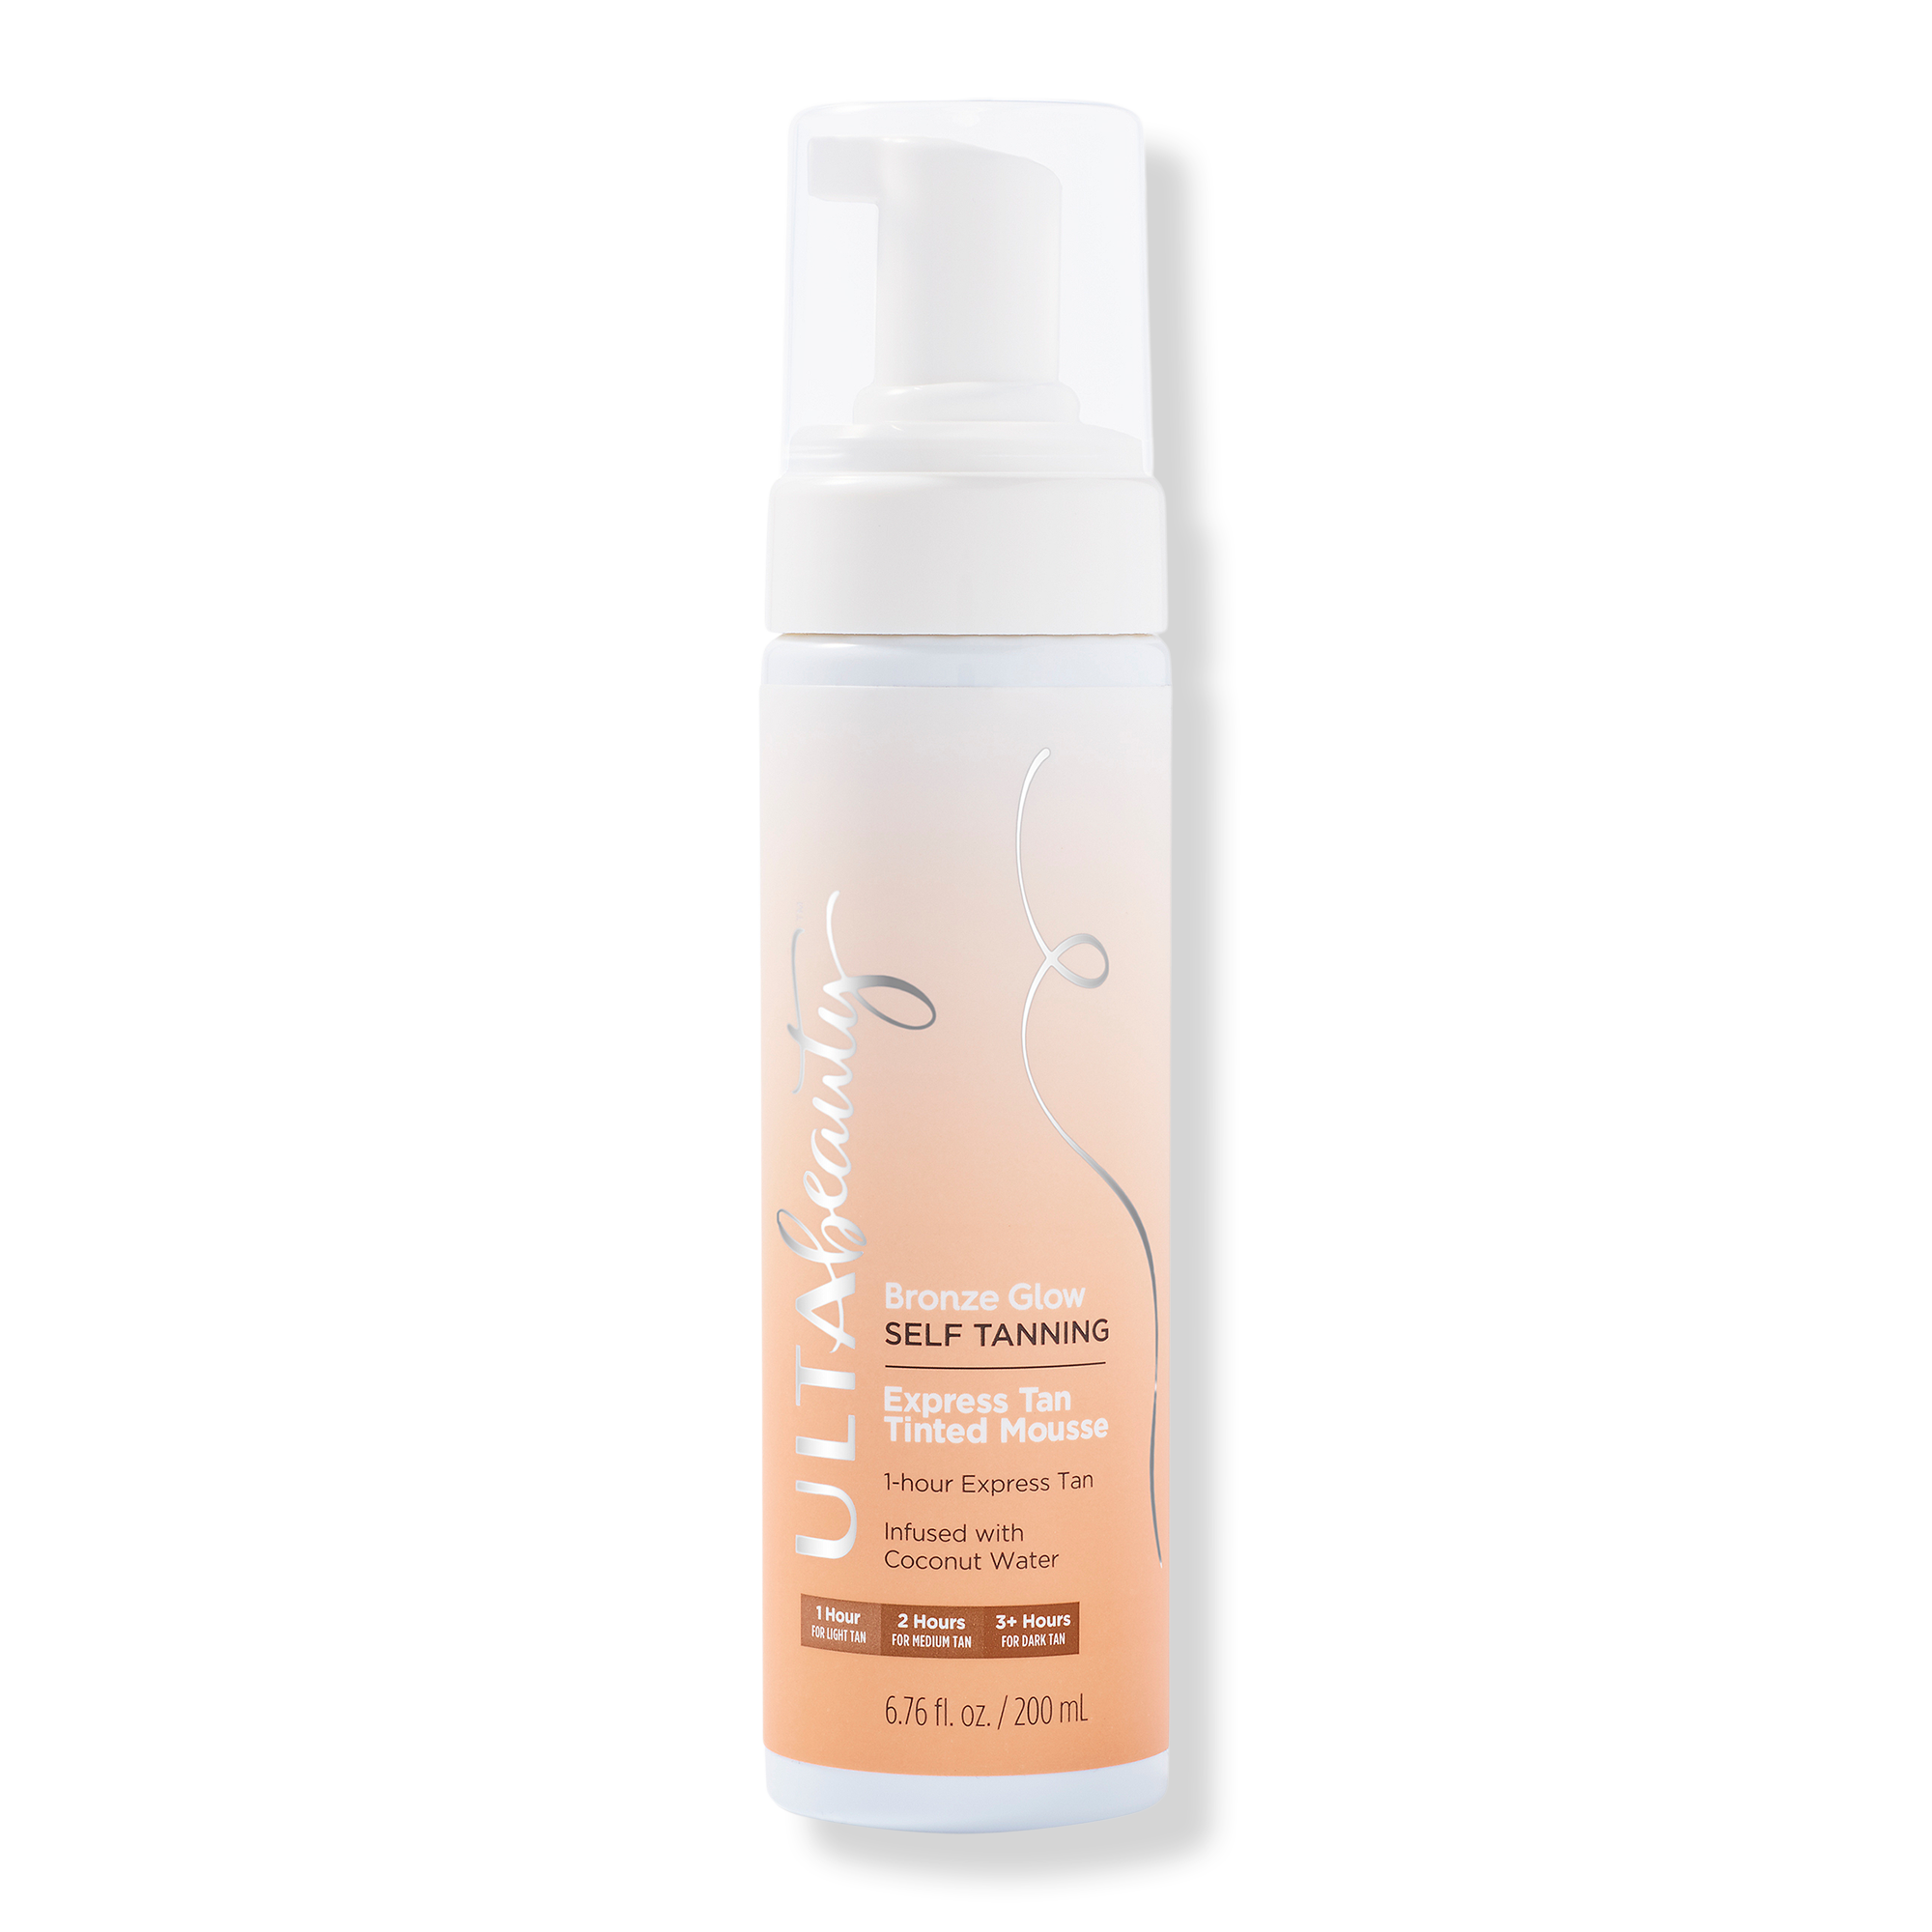 ULTA BEAUTY COLLECTION SELF TANNING EXPRESS TAN TINTED MOUSSE INTERNATIONAL SHIPPING